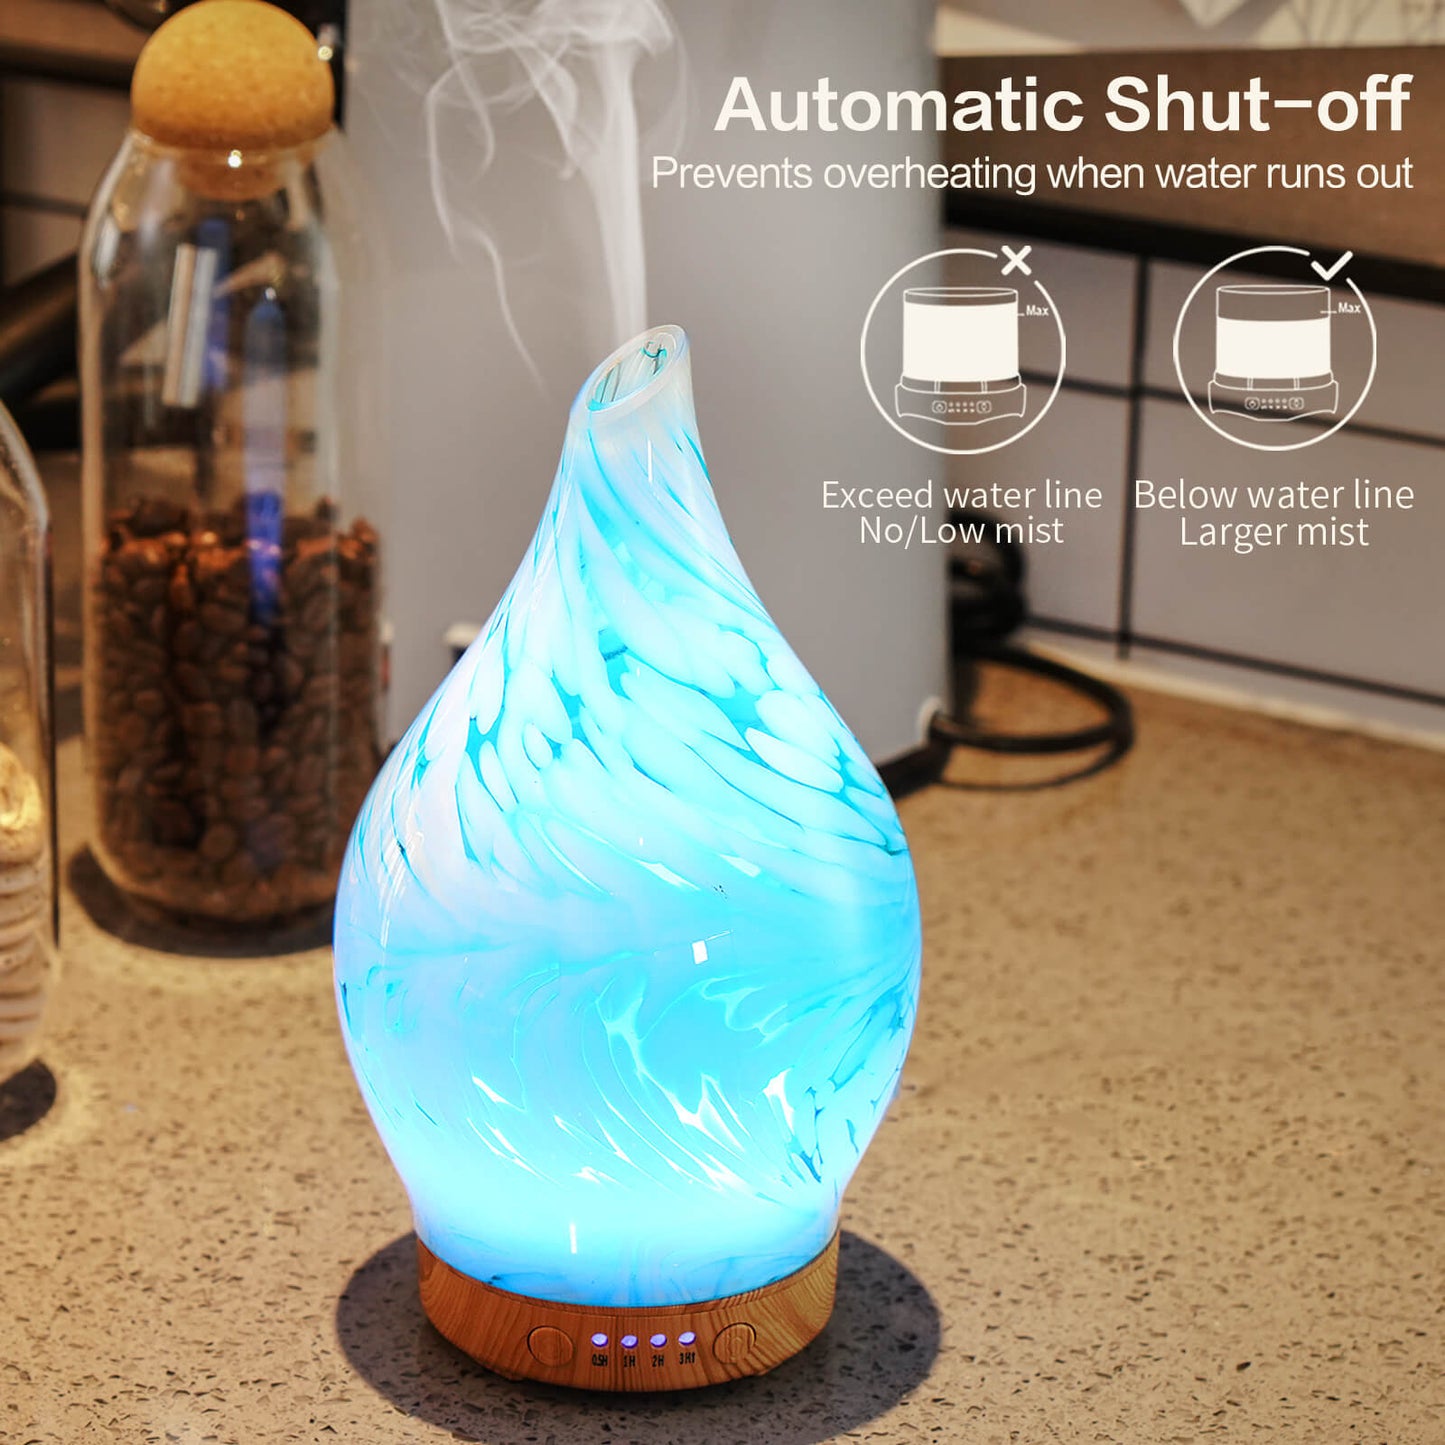 Porseme 100ml Essential Oil Diffuser Glass Color Changing Aroma Air Diffusers Aromatherapy Ultrasonic Cool Mist Humidifier 4 Running Hours Waterless Auto-Off for Sleeping Yoga Office Spa (Blue Wave)